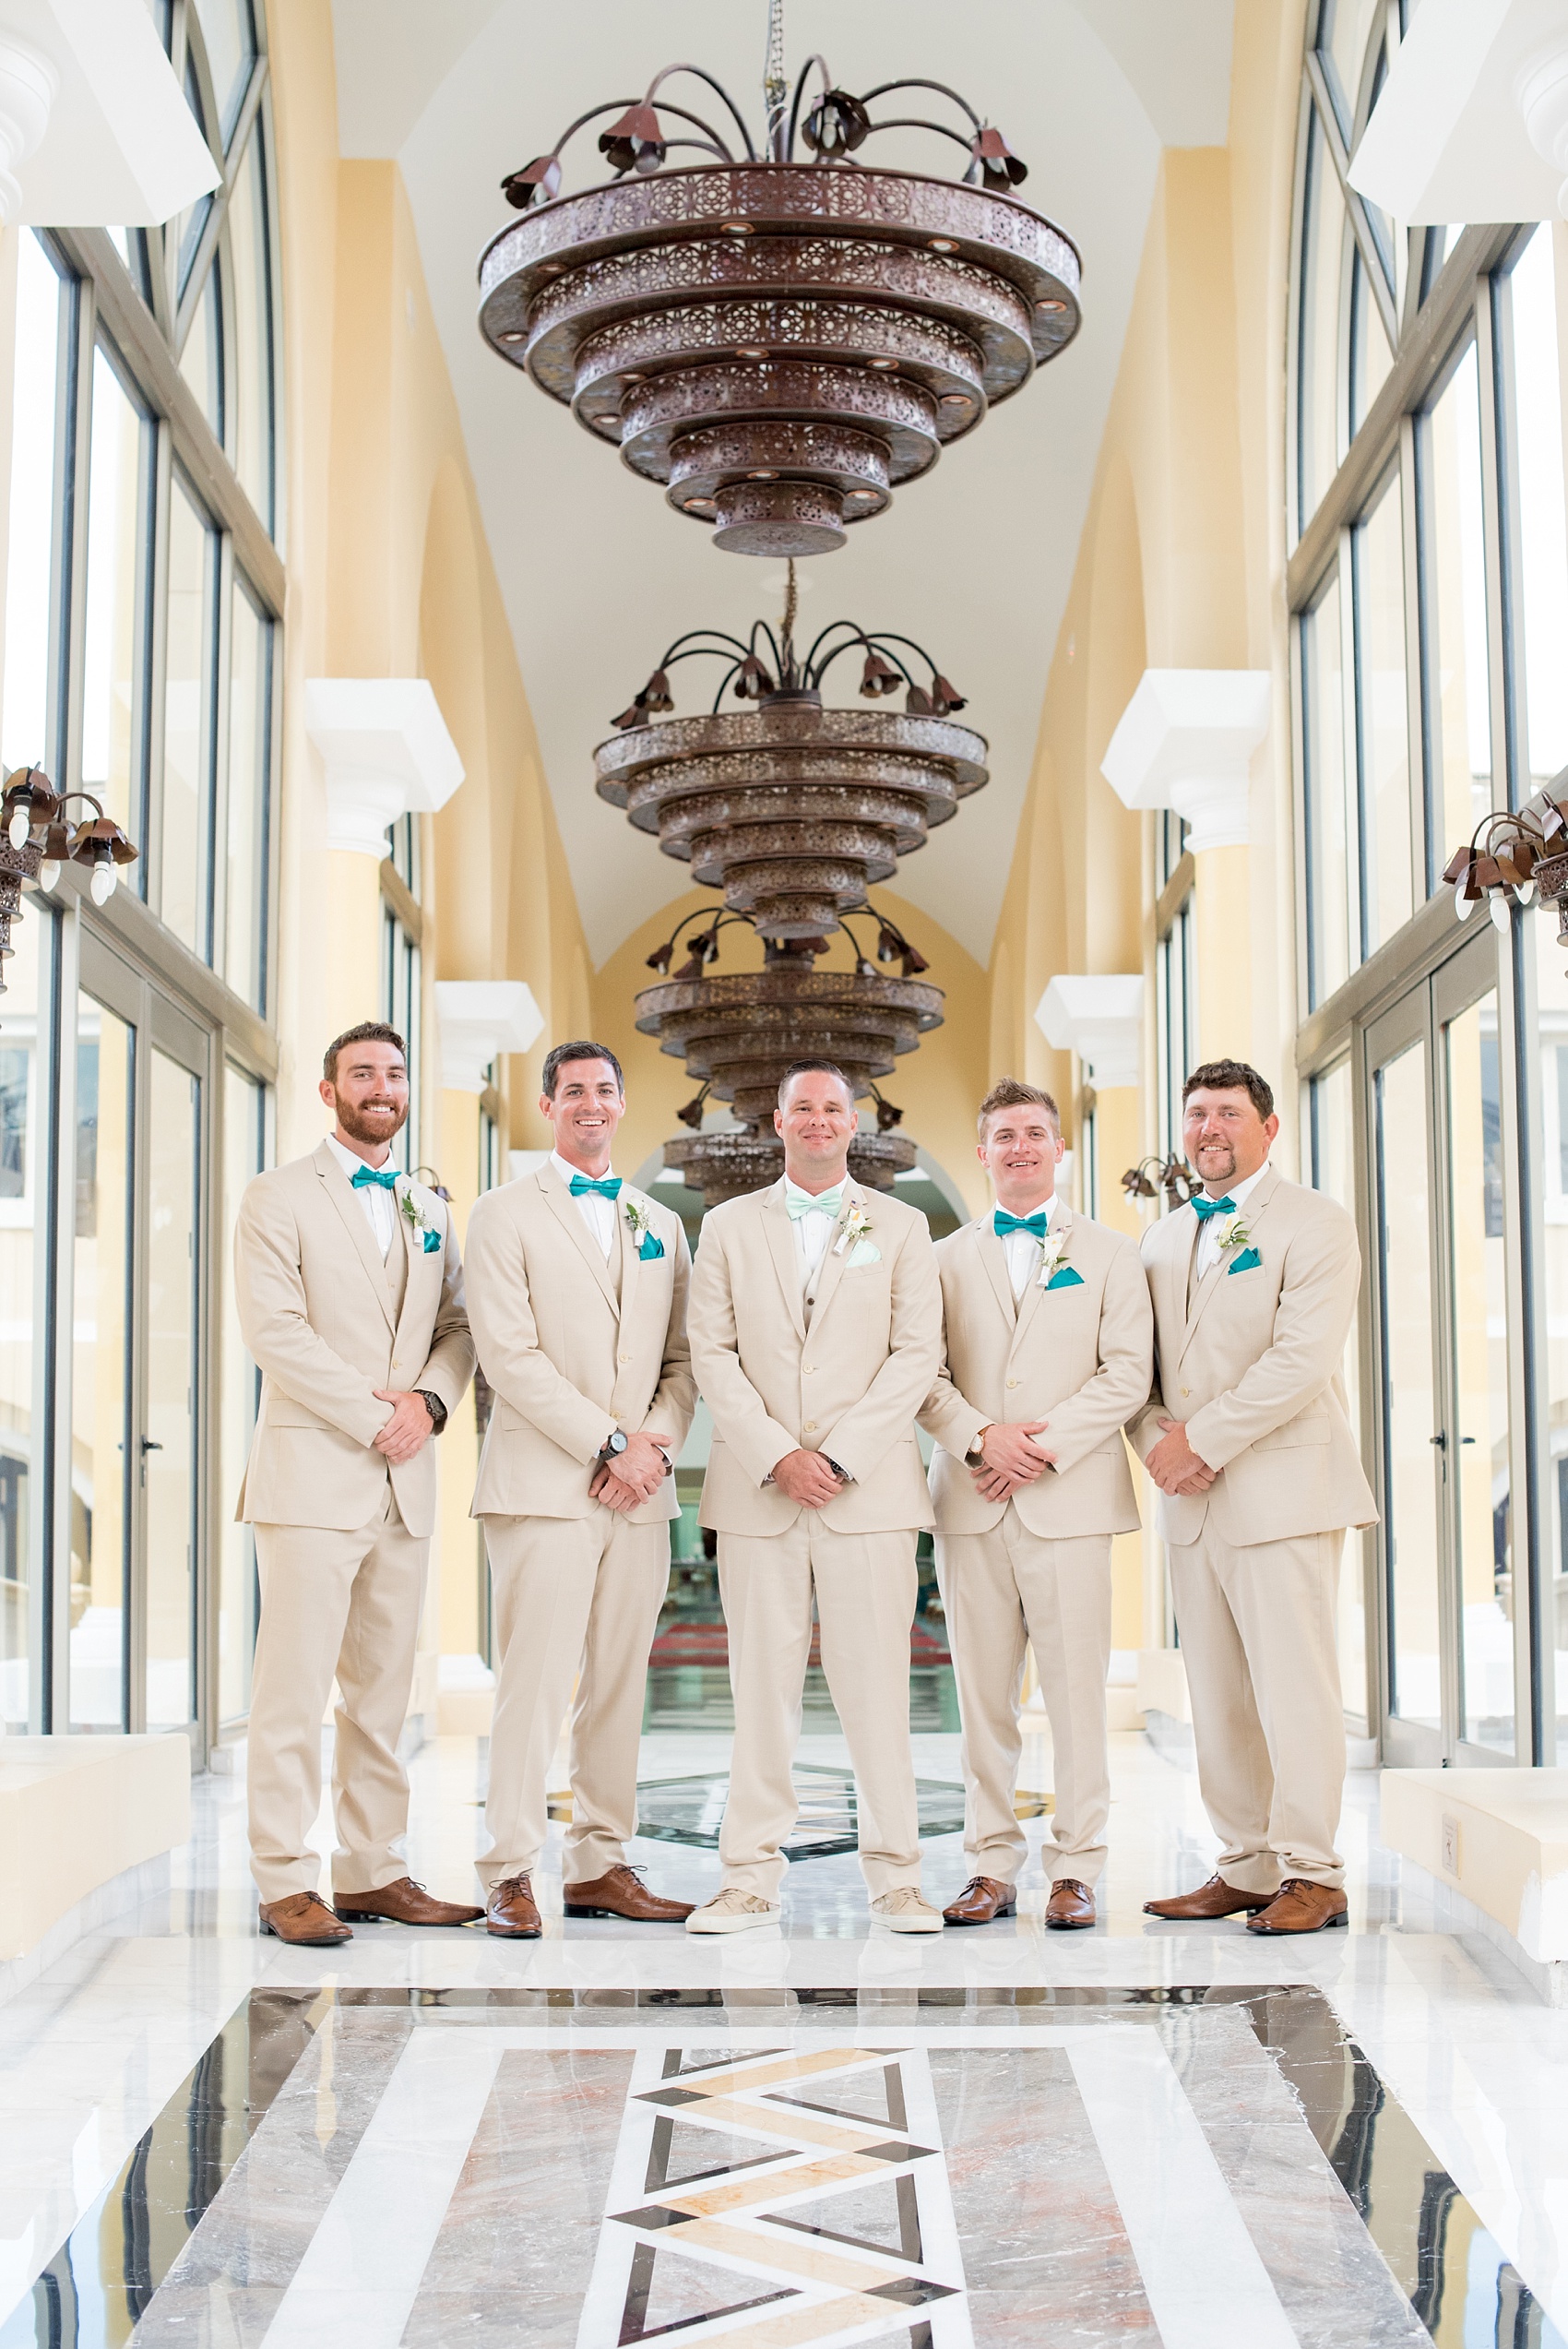 Mikkel Paige Photography photos from a wedding at Grand Paraiso, Mexico, Playa del Carmen Iberostar resort. Picture of the groom and his groomsmen in a grand hallway of the resort.